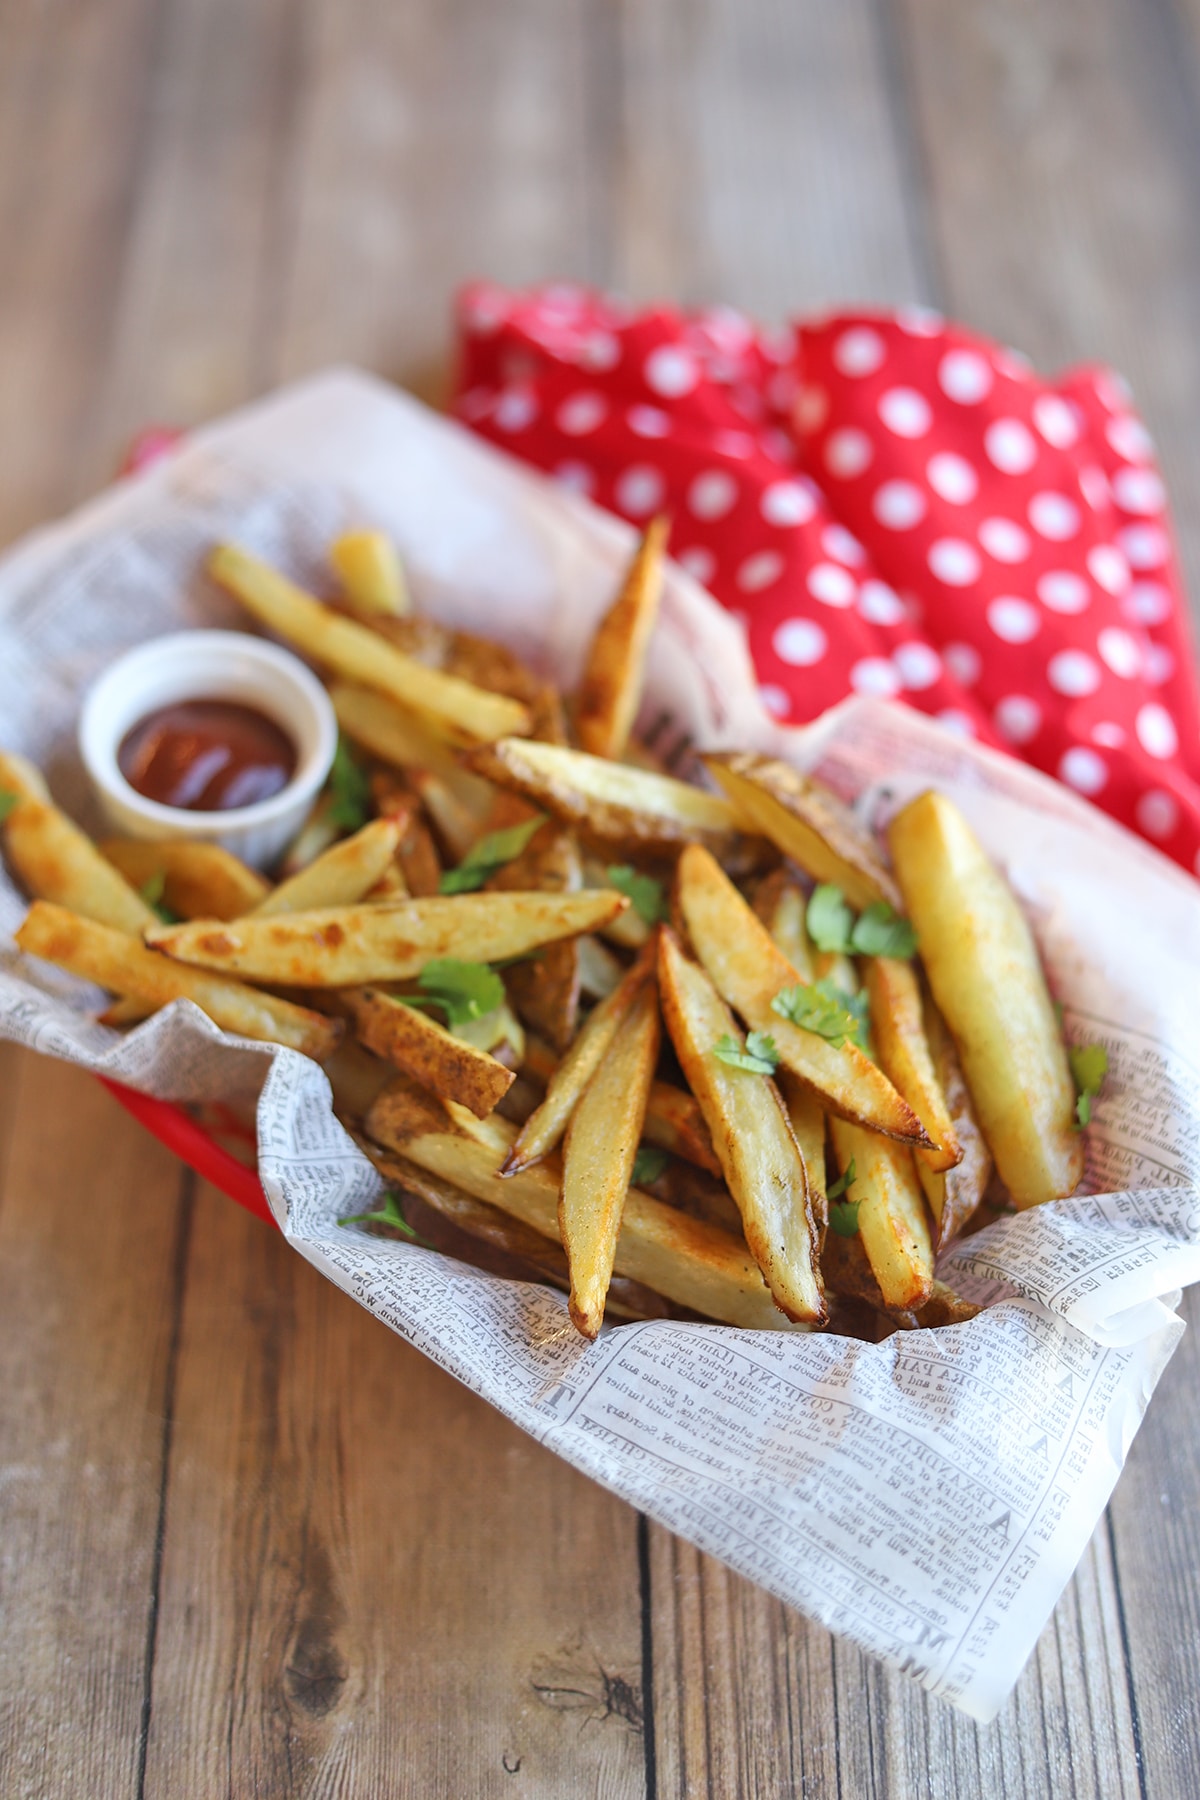 Basket of fries with ketchup.